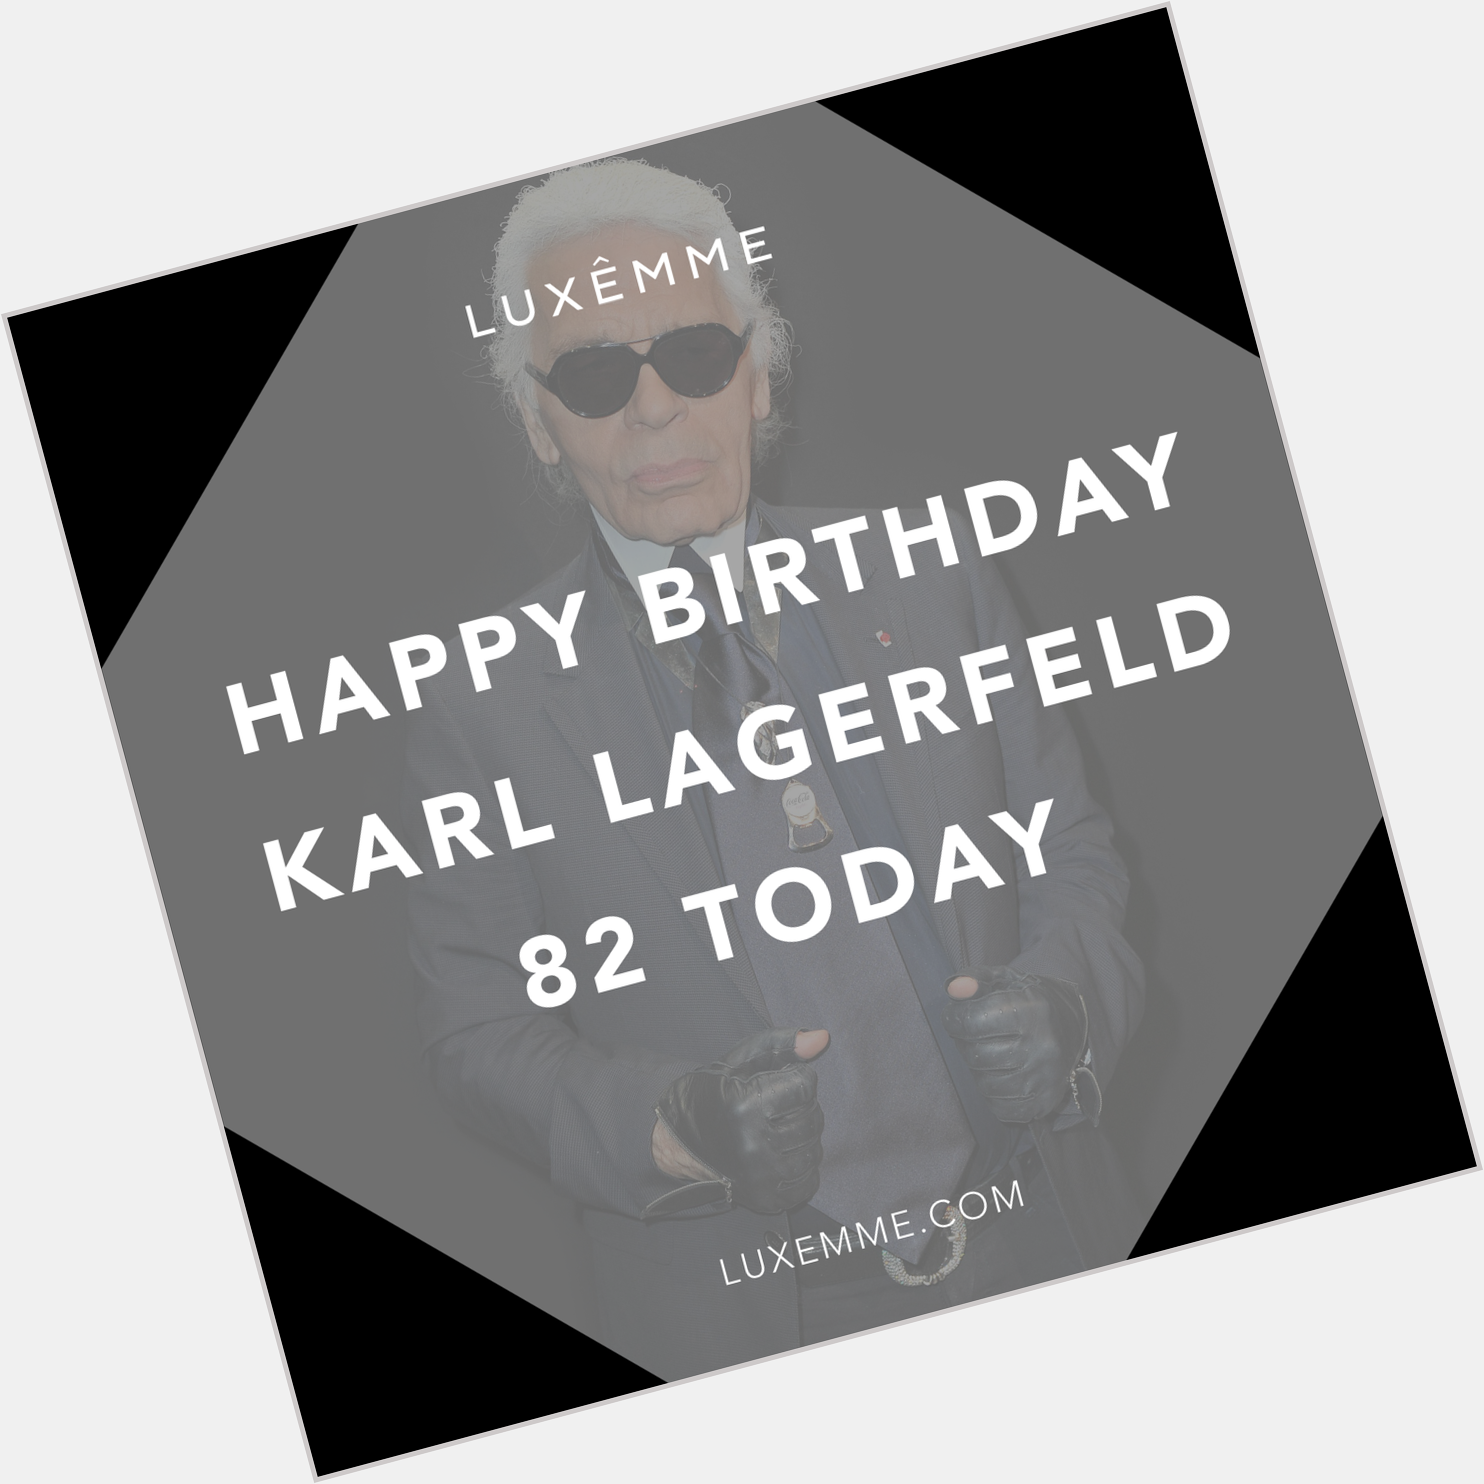 Happy Birthday Karl Lagerfeld. 82 years young today!!   